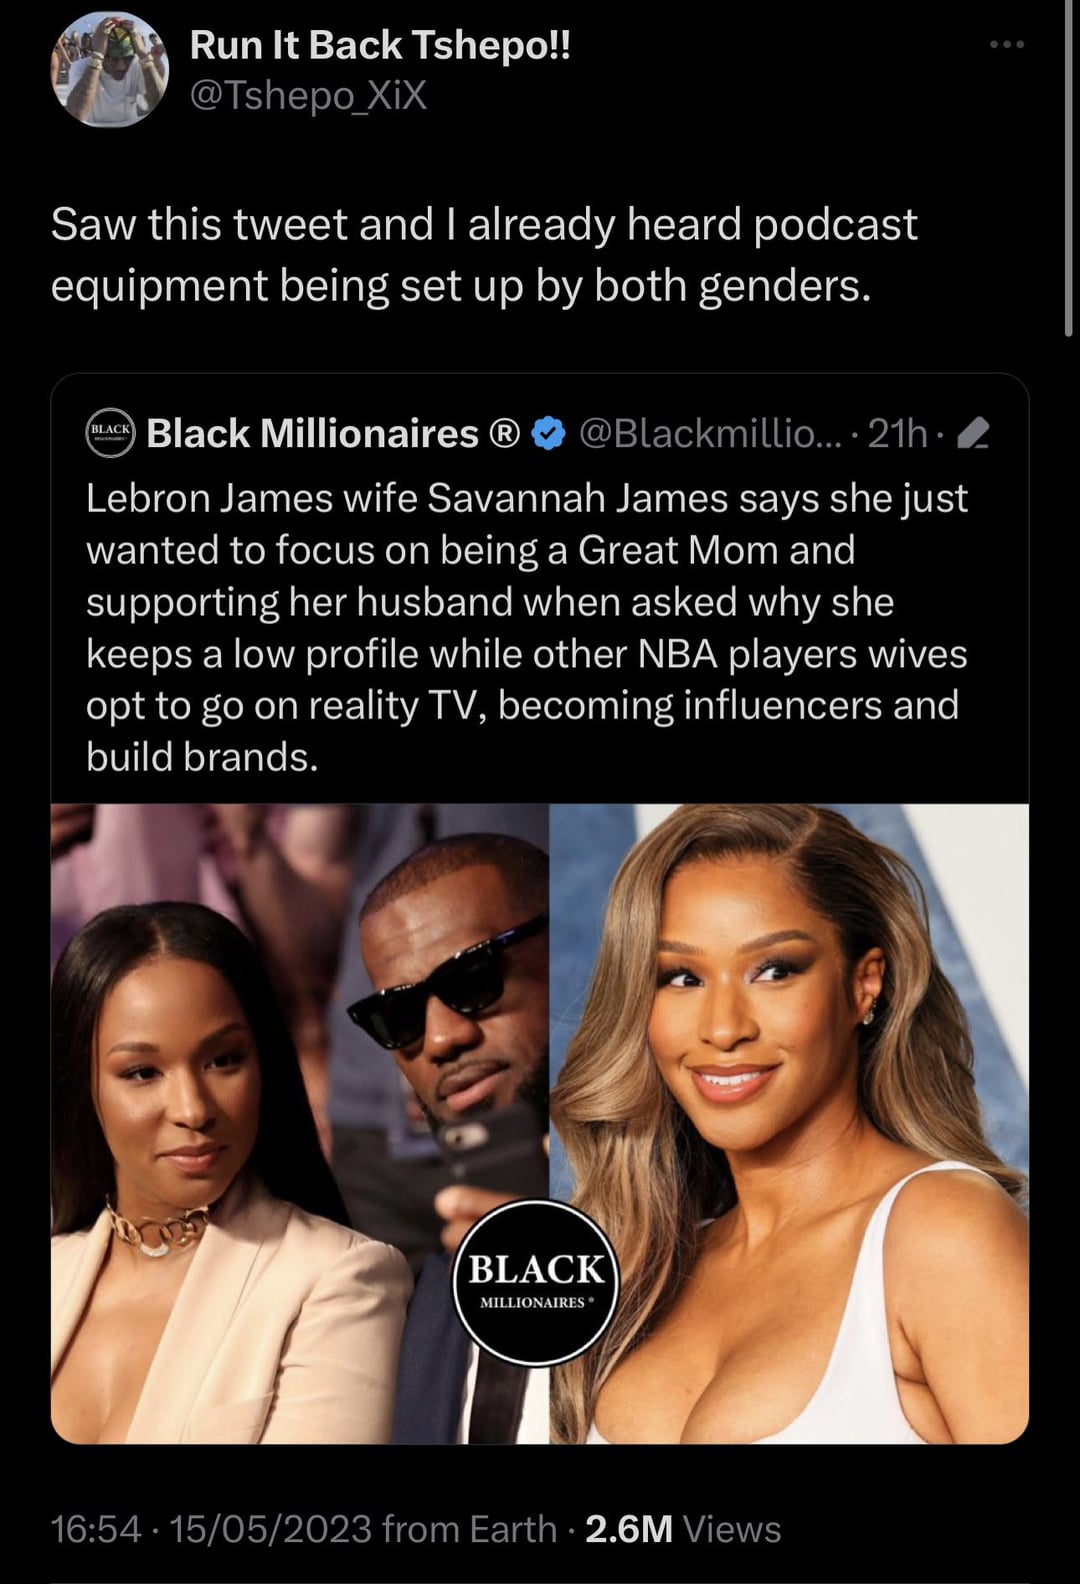 funny tweets - -  - Run It Back Tshepo!! Saw this tweet and I already heard podcast equipment being set up by both genders. Black Black Millionaires .... 21h. Lebron James wife Savannah James says she just wanted to focus on being a Great Mom and supporti